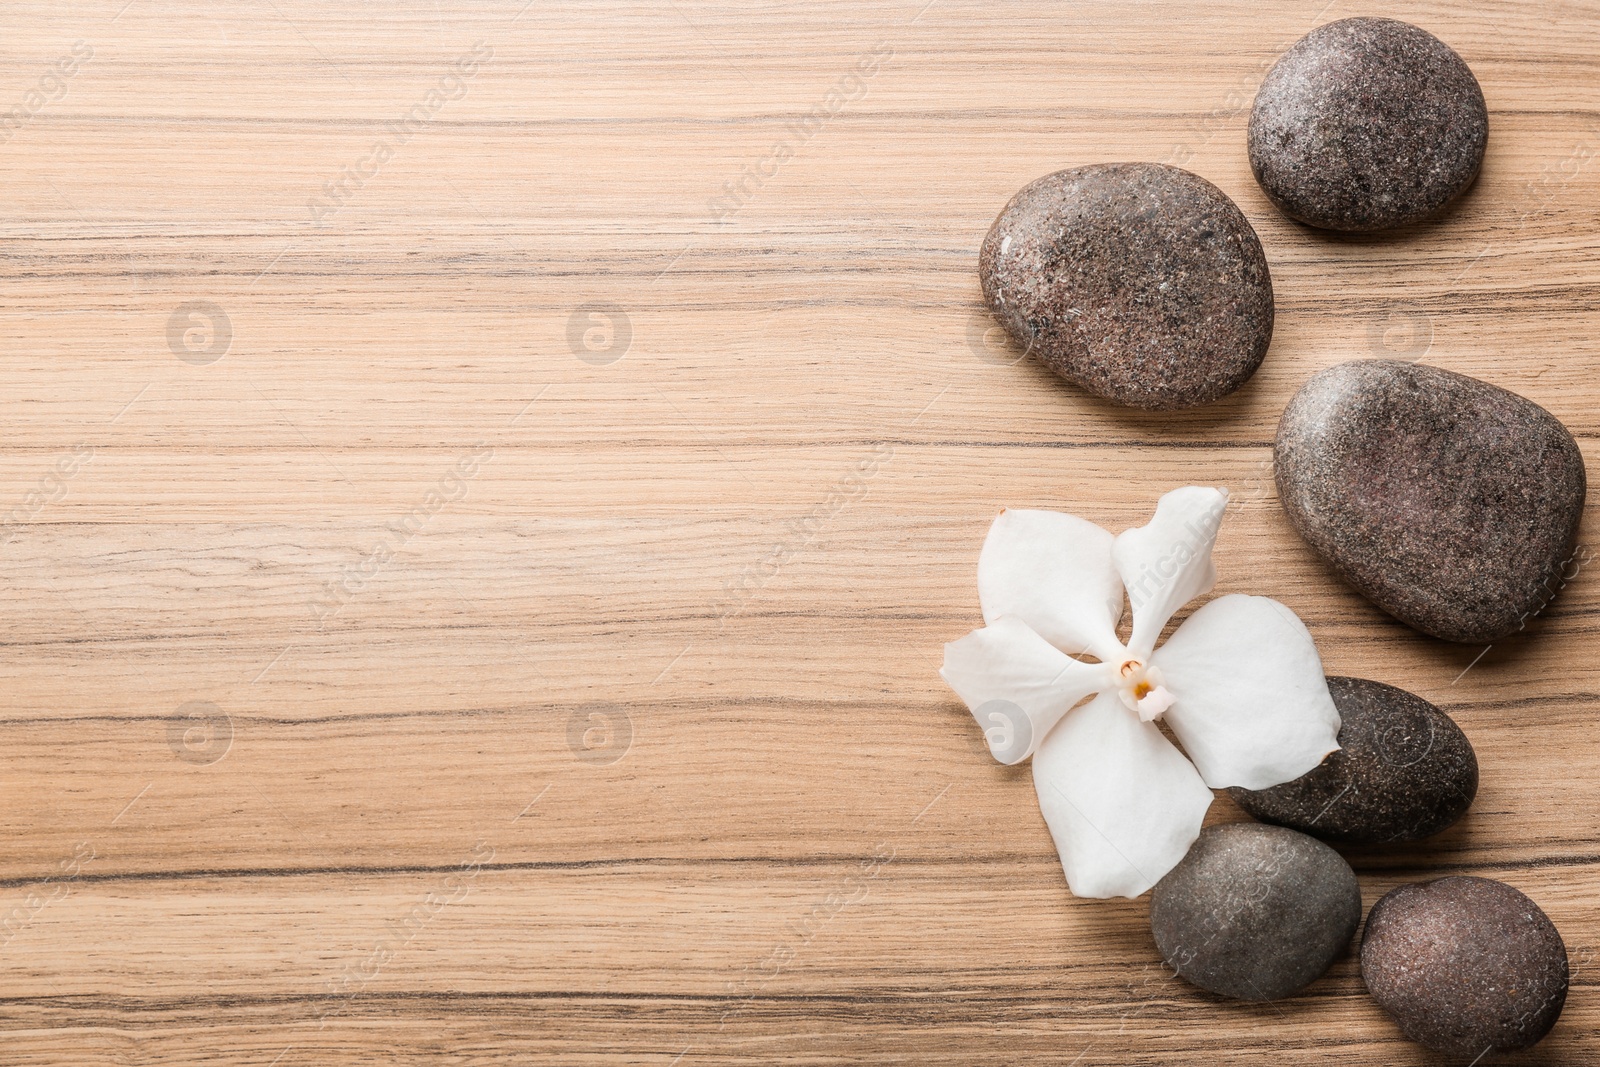 Photo of Stones and orchid flower on wooden background, top view with space for text. Zen lifestyle